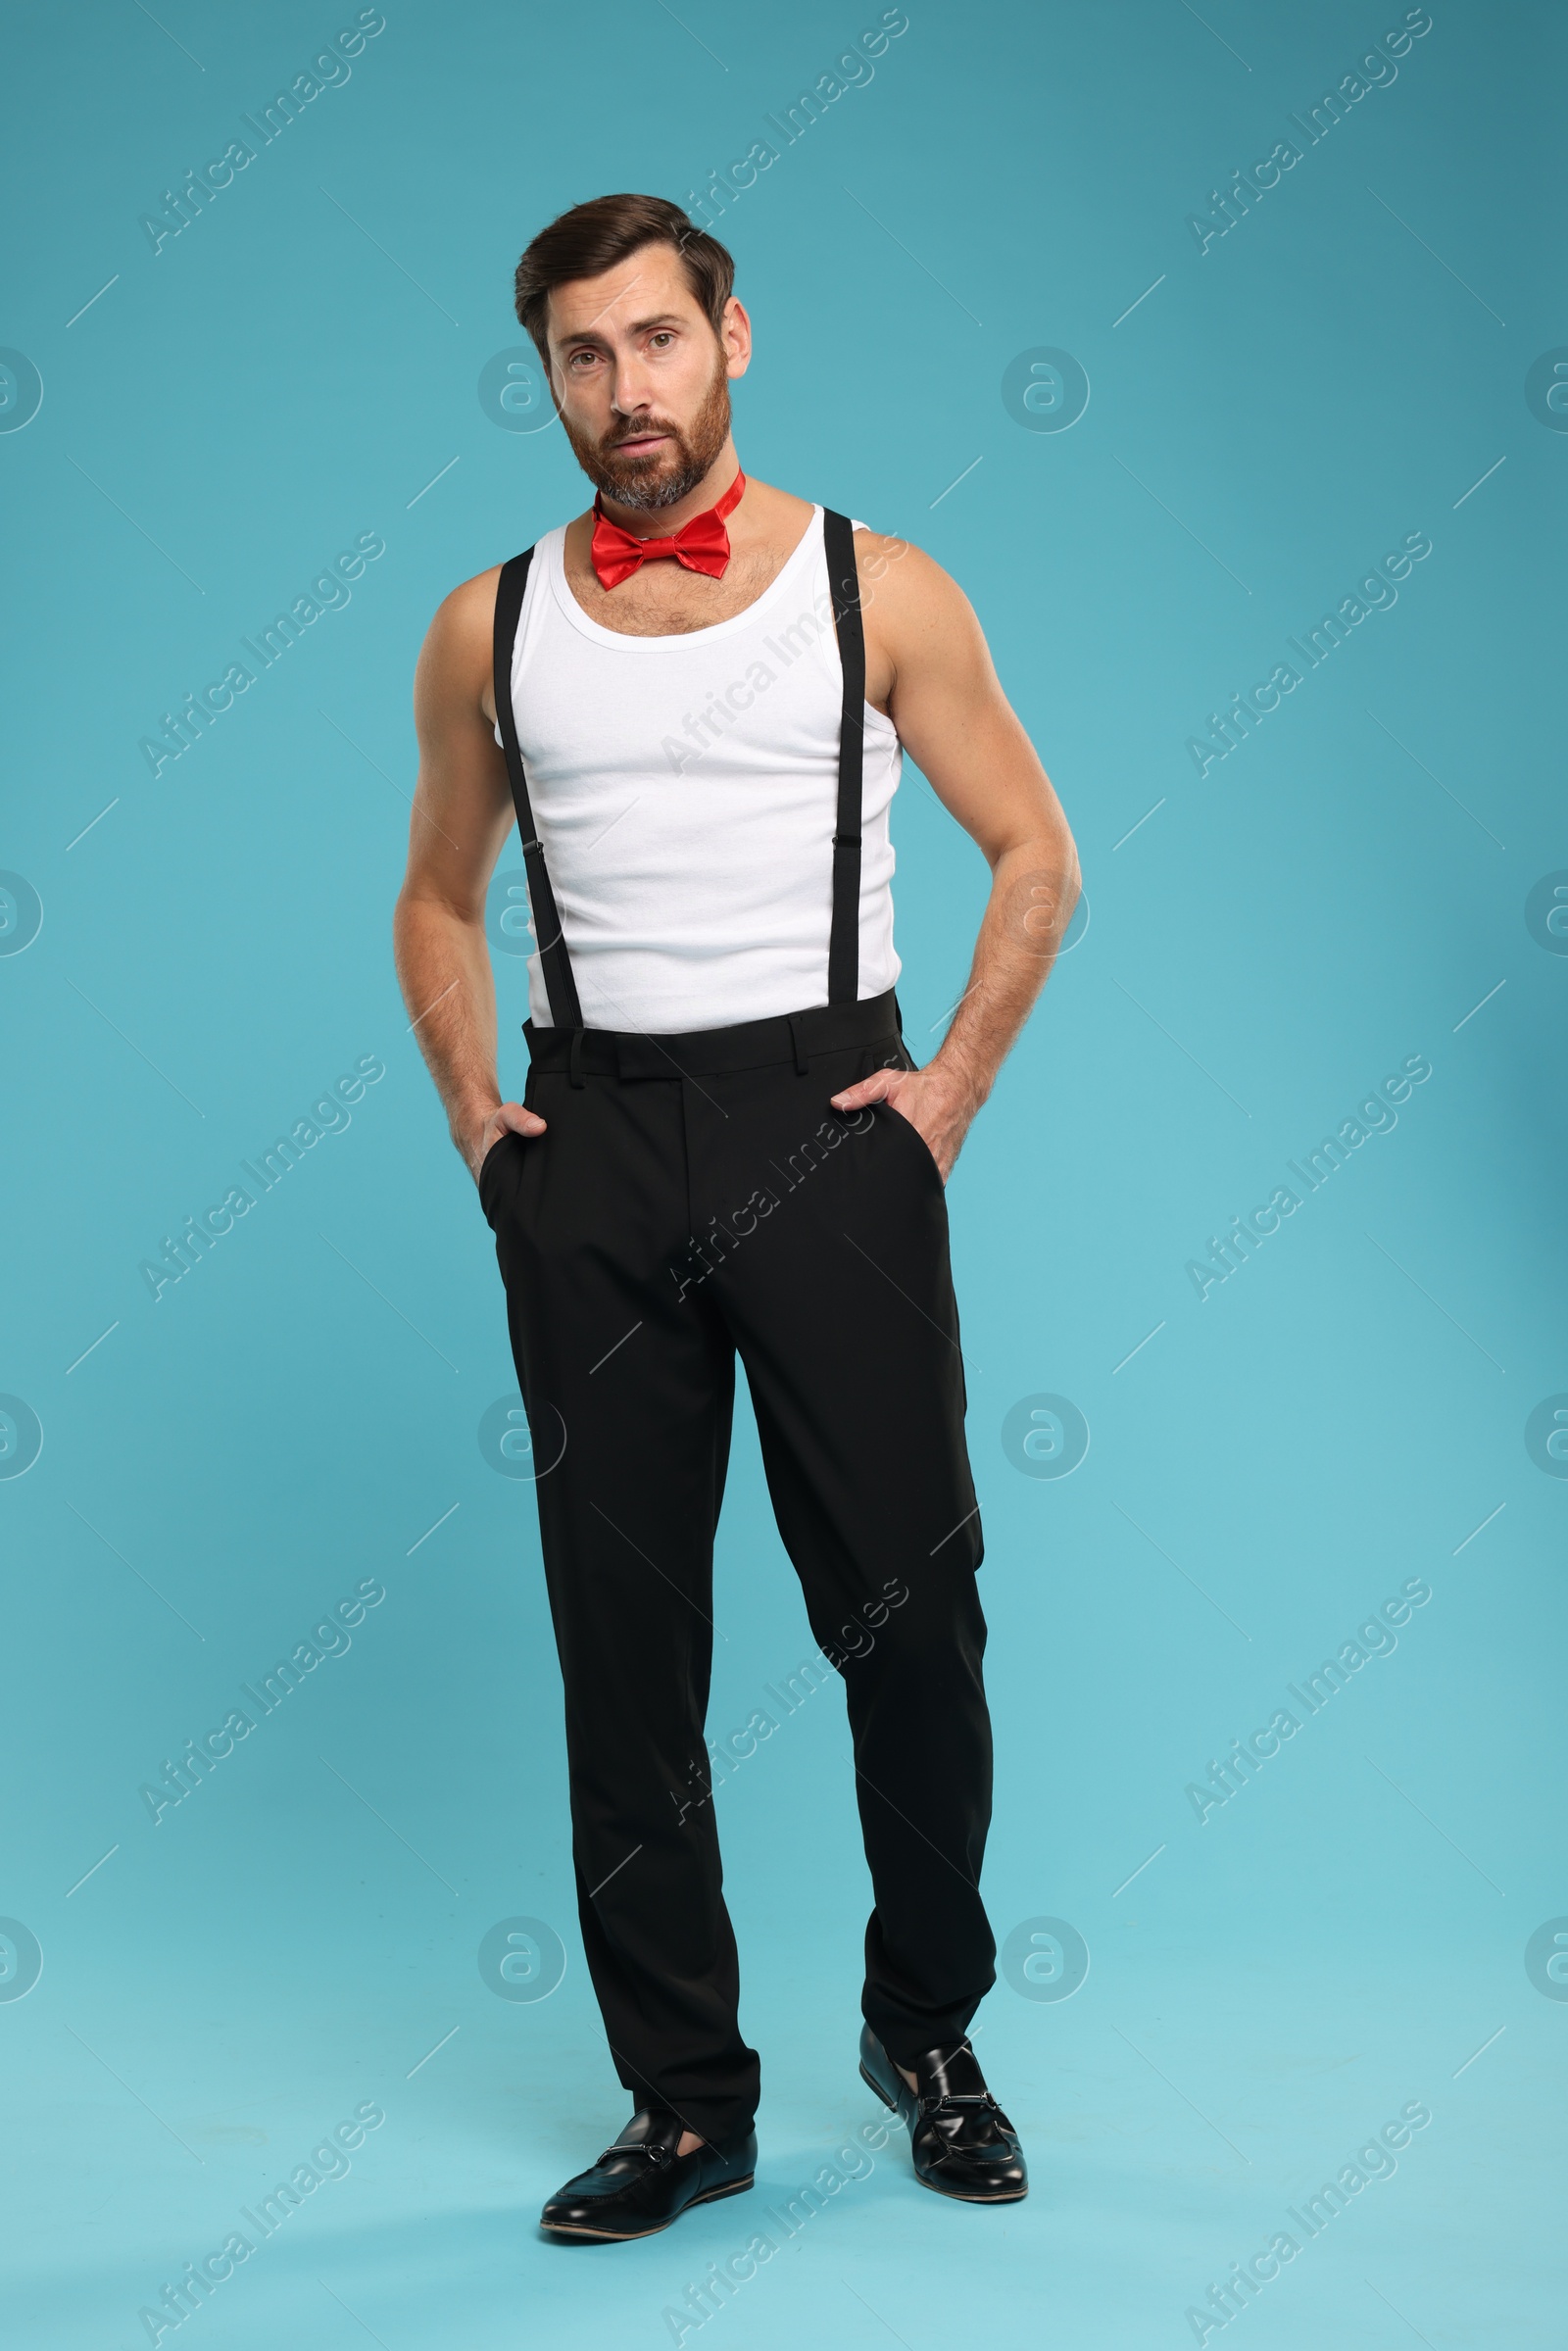 Photo of Attractive man with red bow tie posing on light blue background